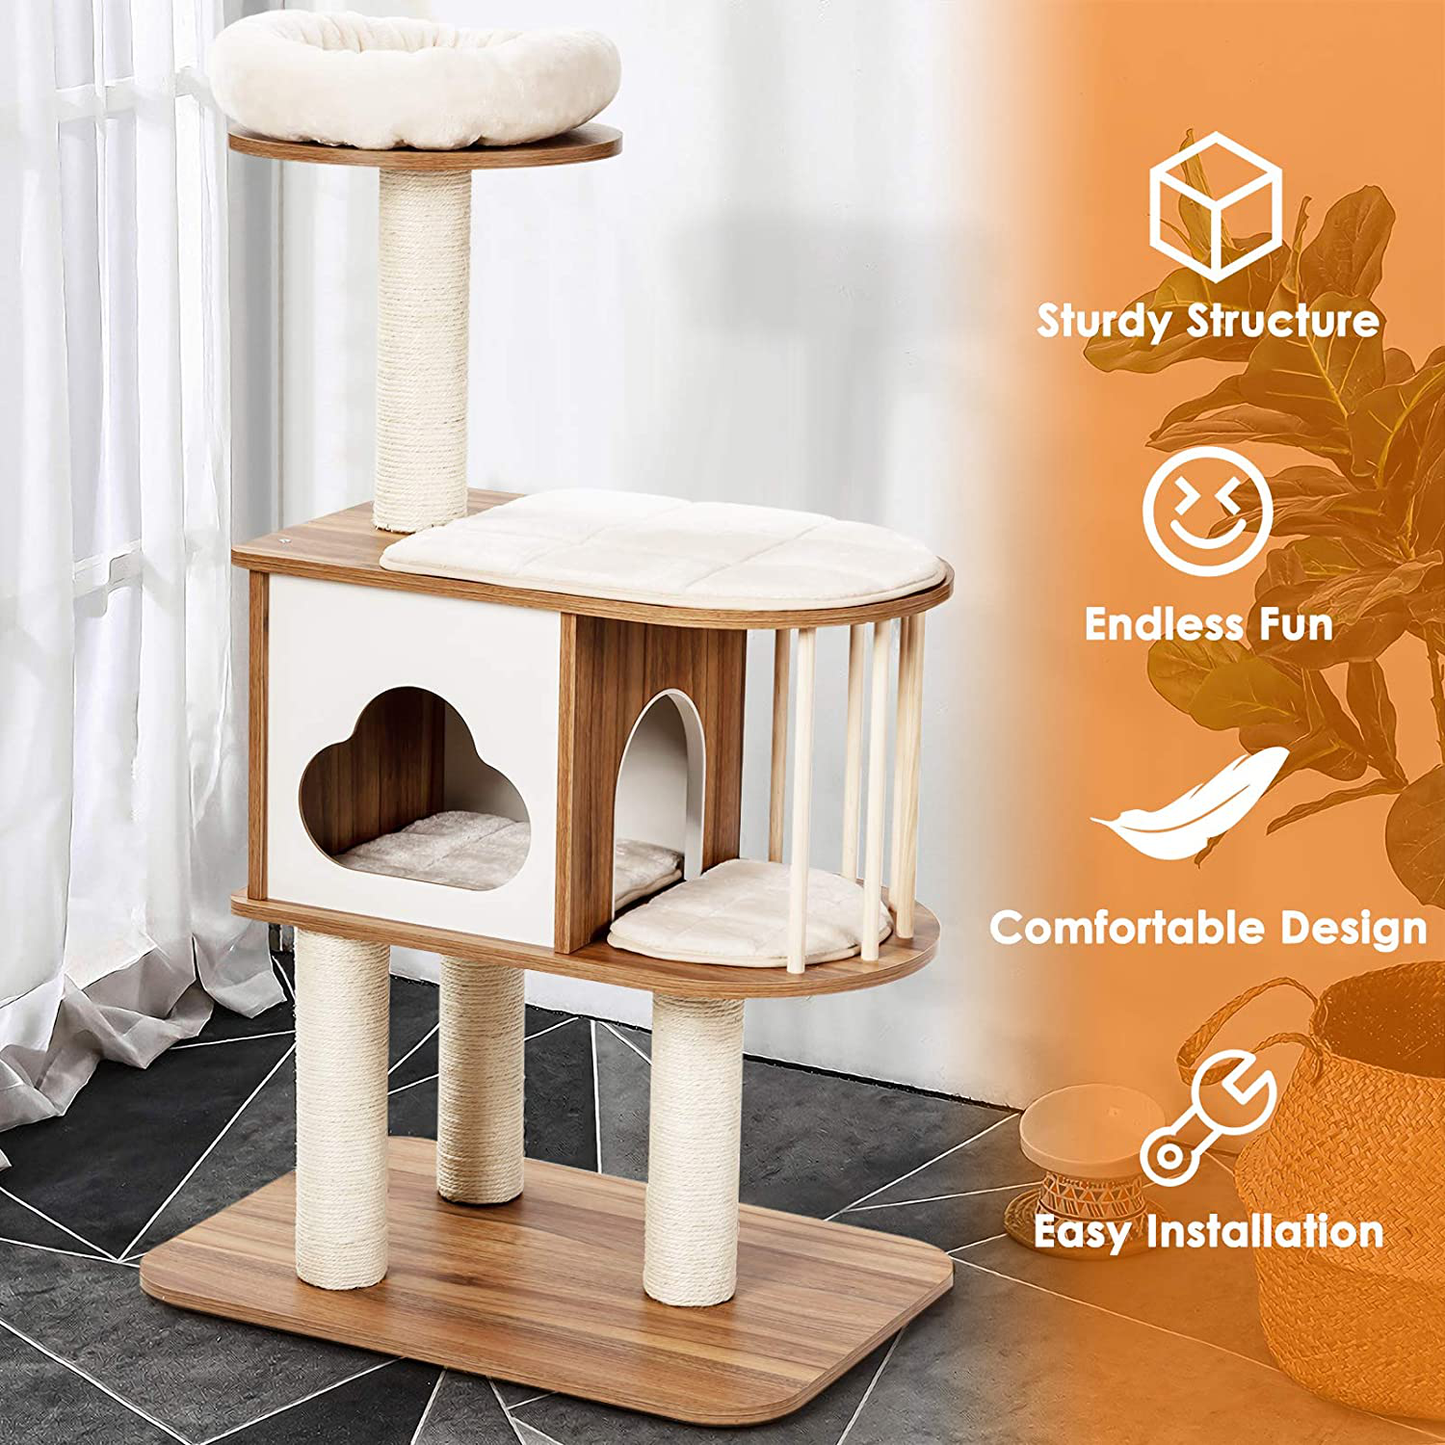 Tangkula Modern Wood Cat Tree, 46 Inches Cat Tower with Platform, Cat Activity Center with Scratching Posts and Washable Cushions, Wooden Cat Condo Furniture for Kittens and Cats